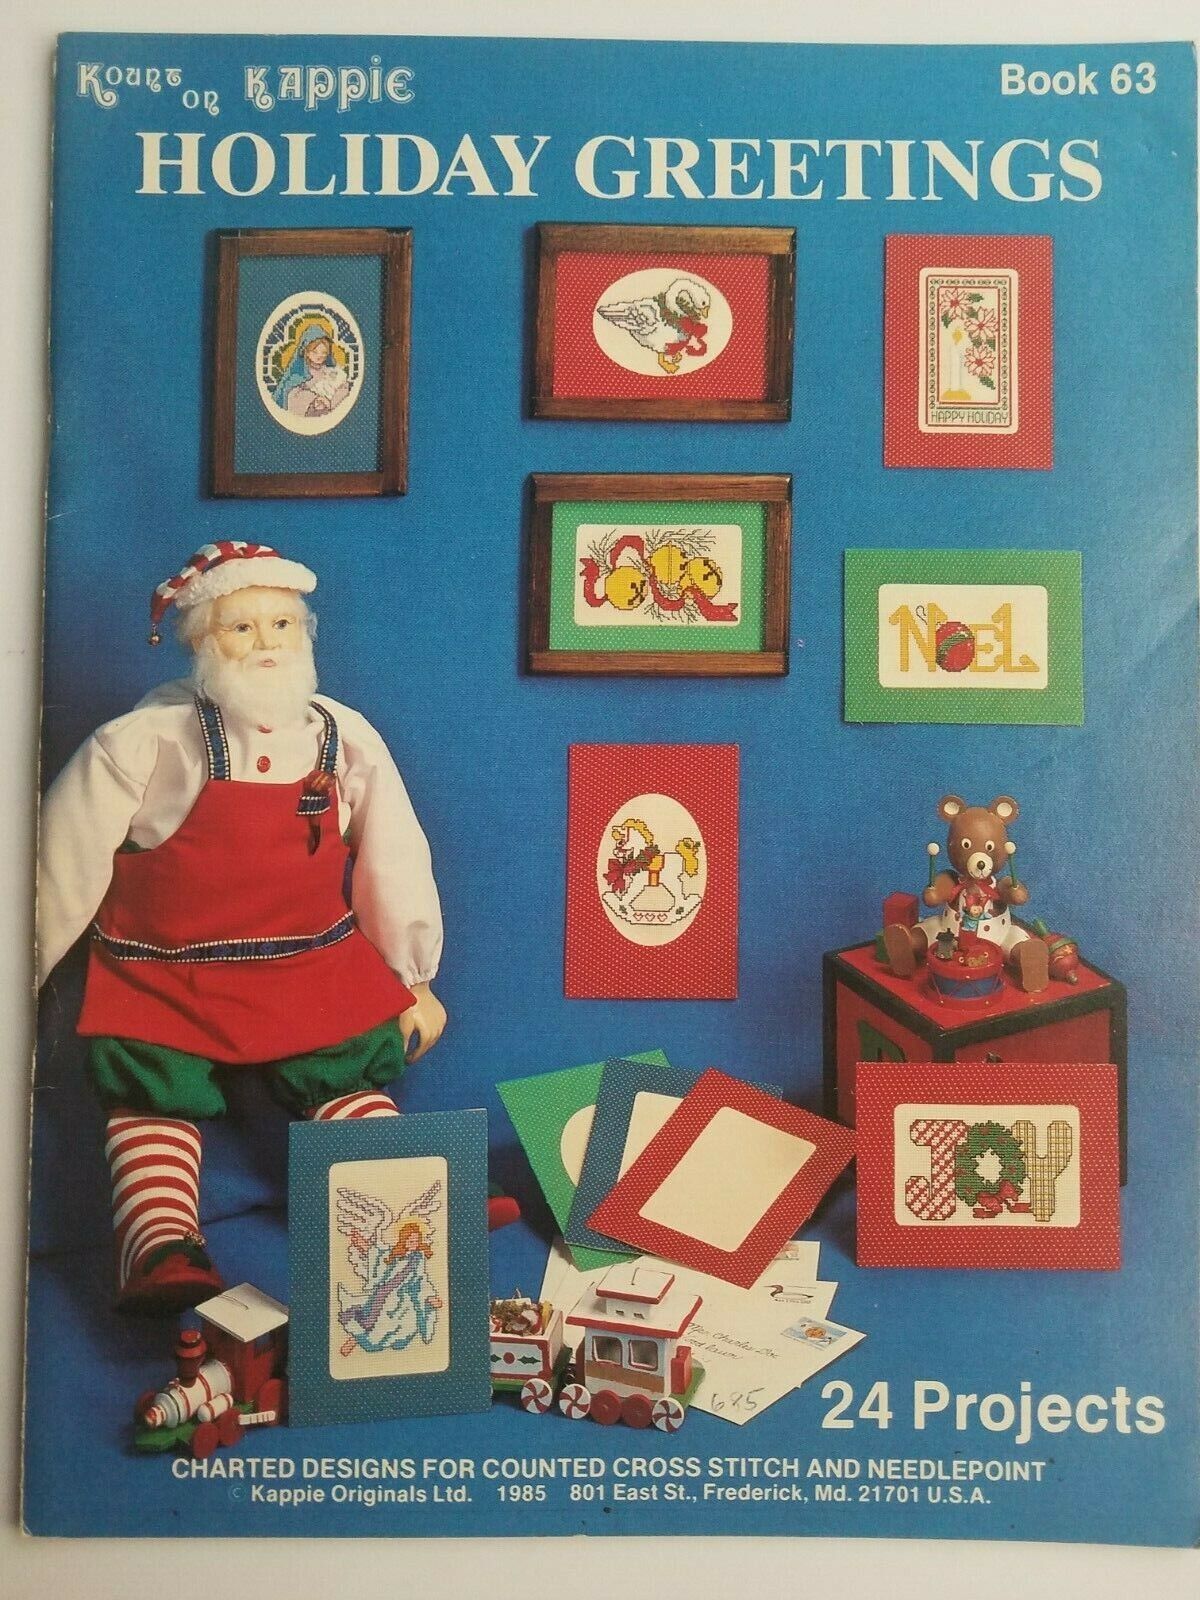 Kappie Holiday Greetings counted cross stitch book 63 - $6.00